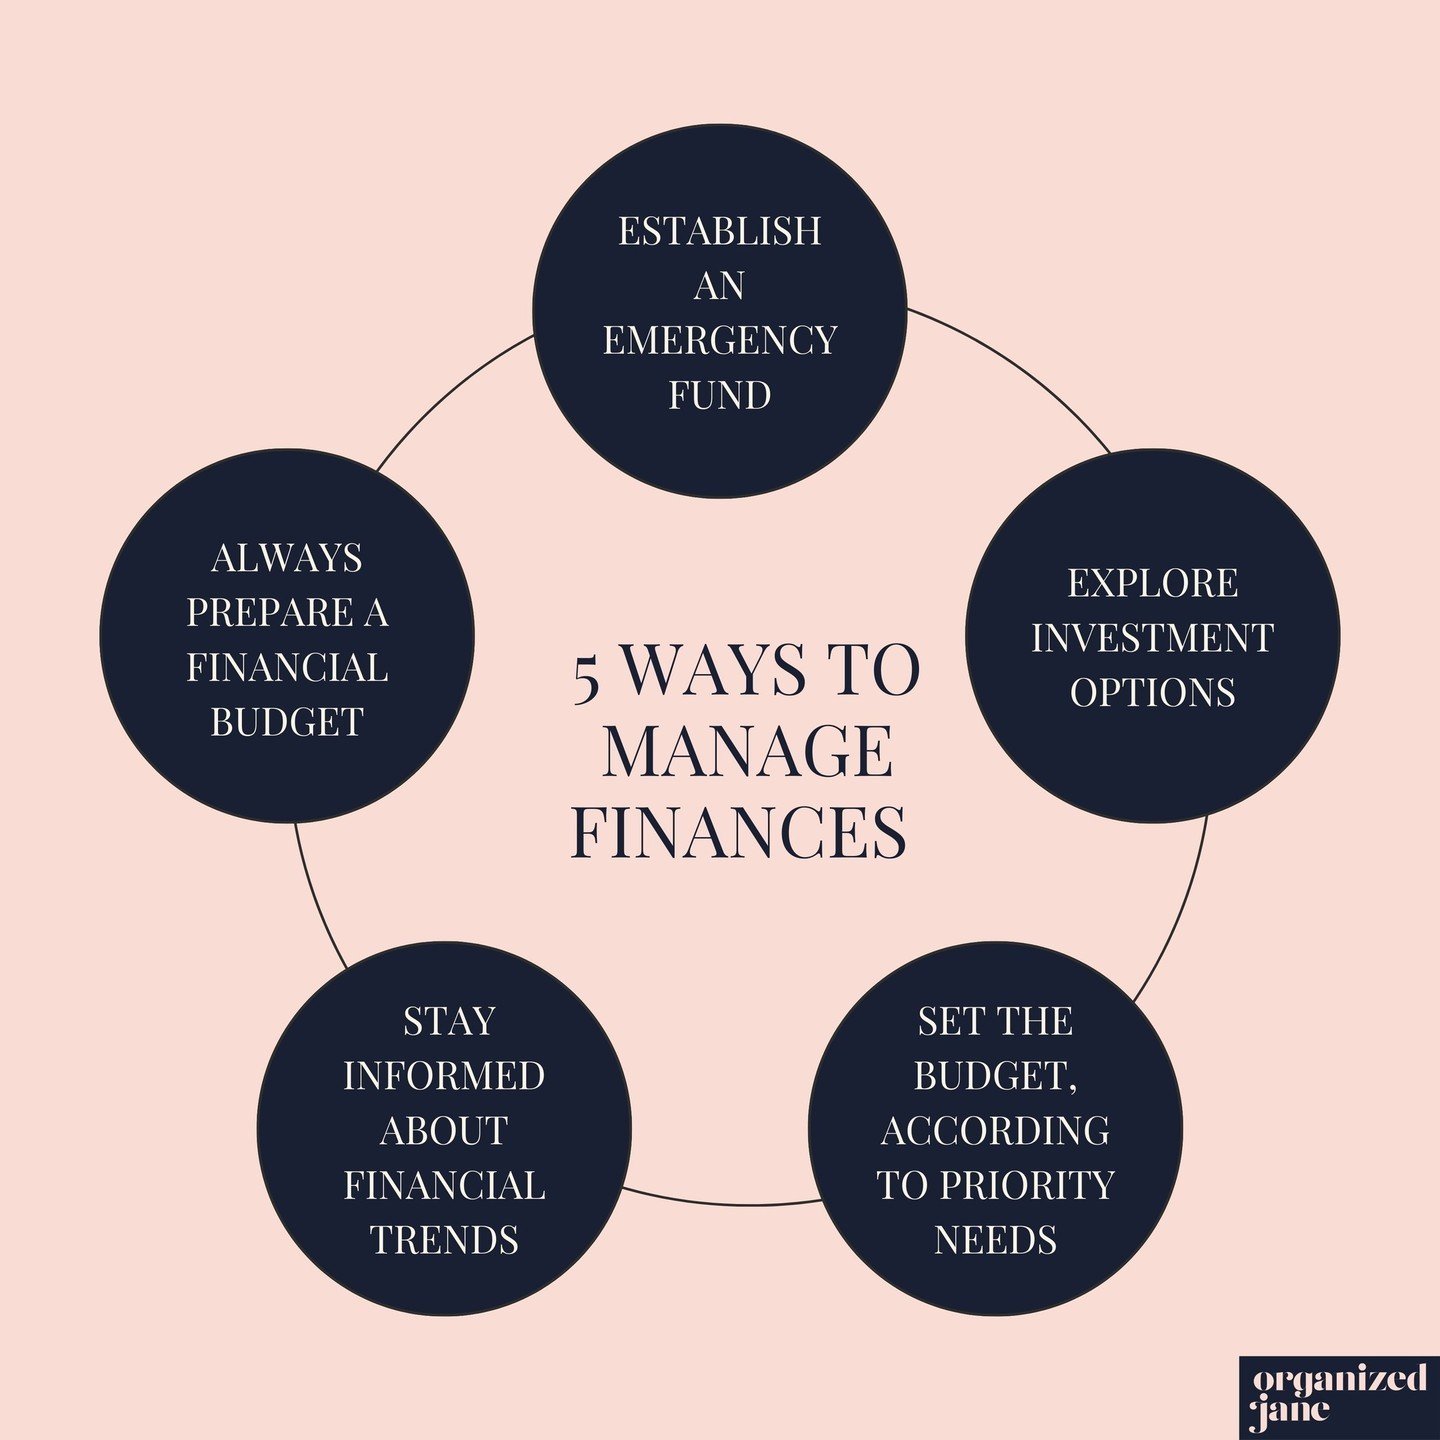 Steer your finances towards stability and growth with my strategic guide to money management. 🌟⁠
1️⃣ Establish a Resilient Emergency Fund: Build up a safety net that can cover at least 3-6 months of living expenses, providing you a financial buffer 